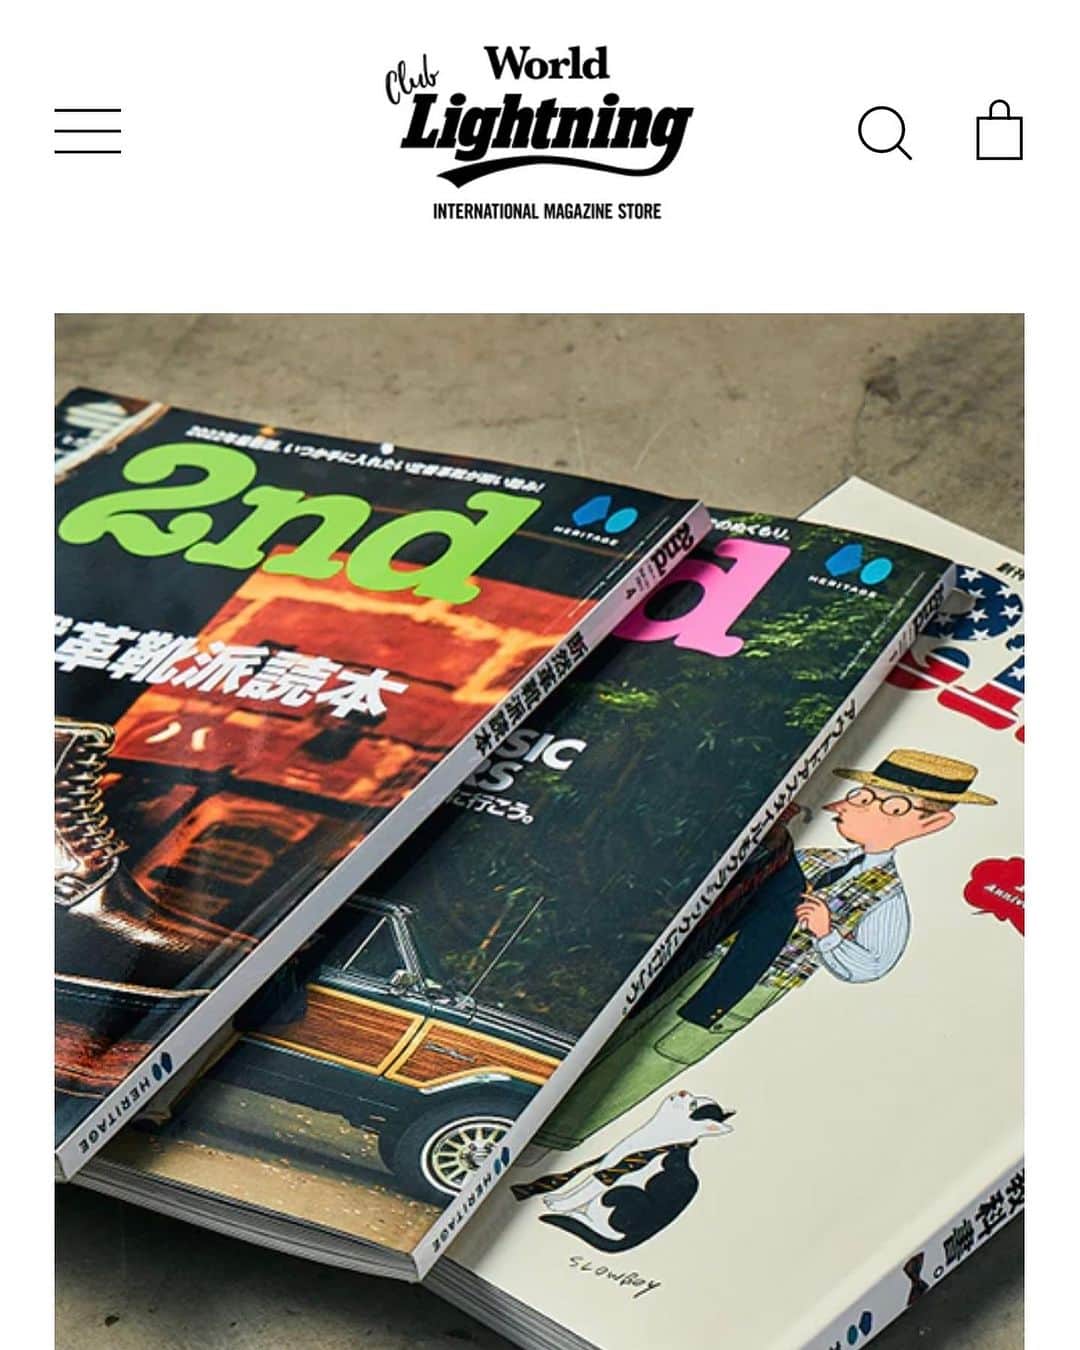 2nd編集部のインスタグラム：「【About purchasing magazines from outside of Japan】  Recently, we have been receiving inquiries from people overseas who want to purchase our products, so we would like to explain how to do so. Our magazines “Lightning”, “Clutch”, and “2nd” can be purchased from the World Club Lightning website and shipped overseas. Please check the URL on the link in my profile.  The following is the URL of World Club Lightning. https://wclub-lightning.com/  最近、海外の方から購入したいとのお問合せをいただくのでその方法をご紹介します。 弊社で販売している雑誌『ライトニング』や『クラッチ』『2nd』などはワールドクラブライトニングというサイトから購入で海外への発送もしております。 プロフィールのリンクにURLが貼ってありますのでチェックしてみてください。  下記がワールドクラブライトニングのURLです。 https://wclub-lightning.com/」